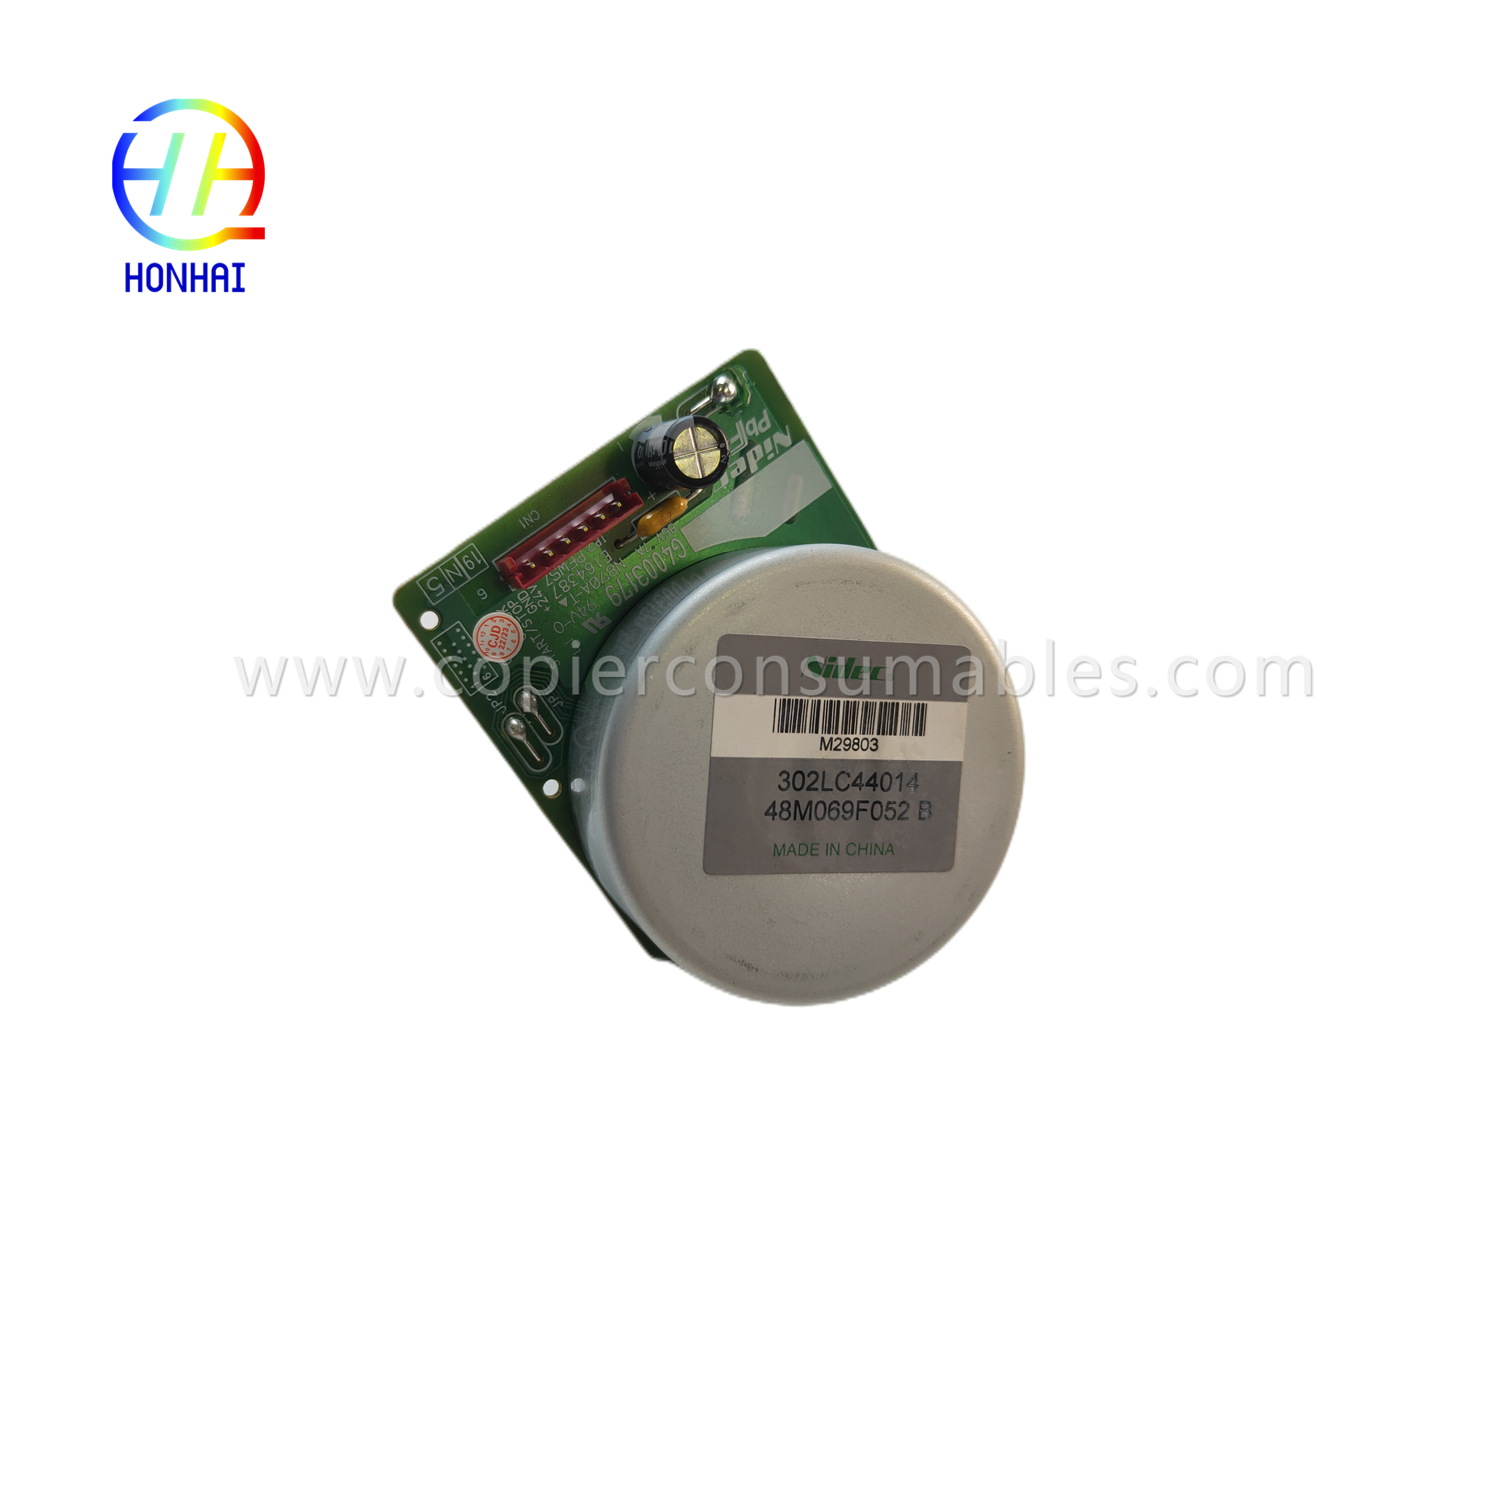 https://c585.goodao.net/motor-voor-kyocera-ecosys-serie-parts-nr-302lc44014-48m069f052-b-product/